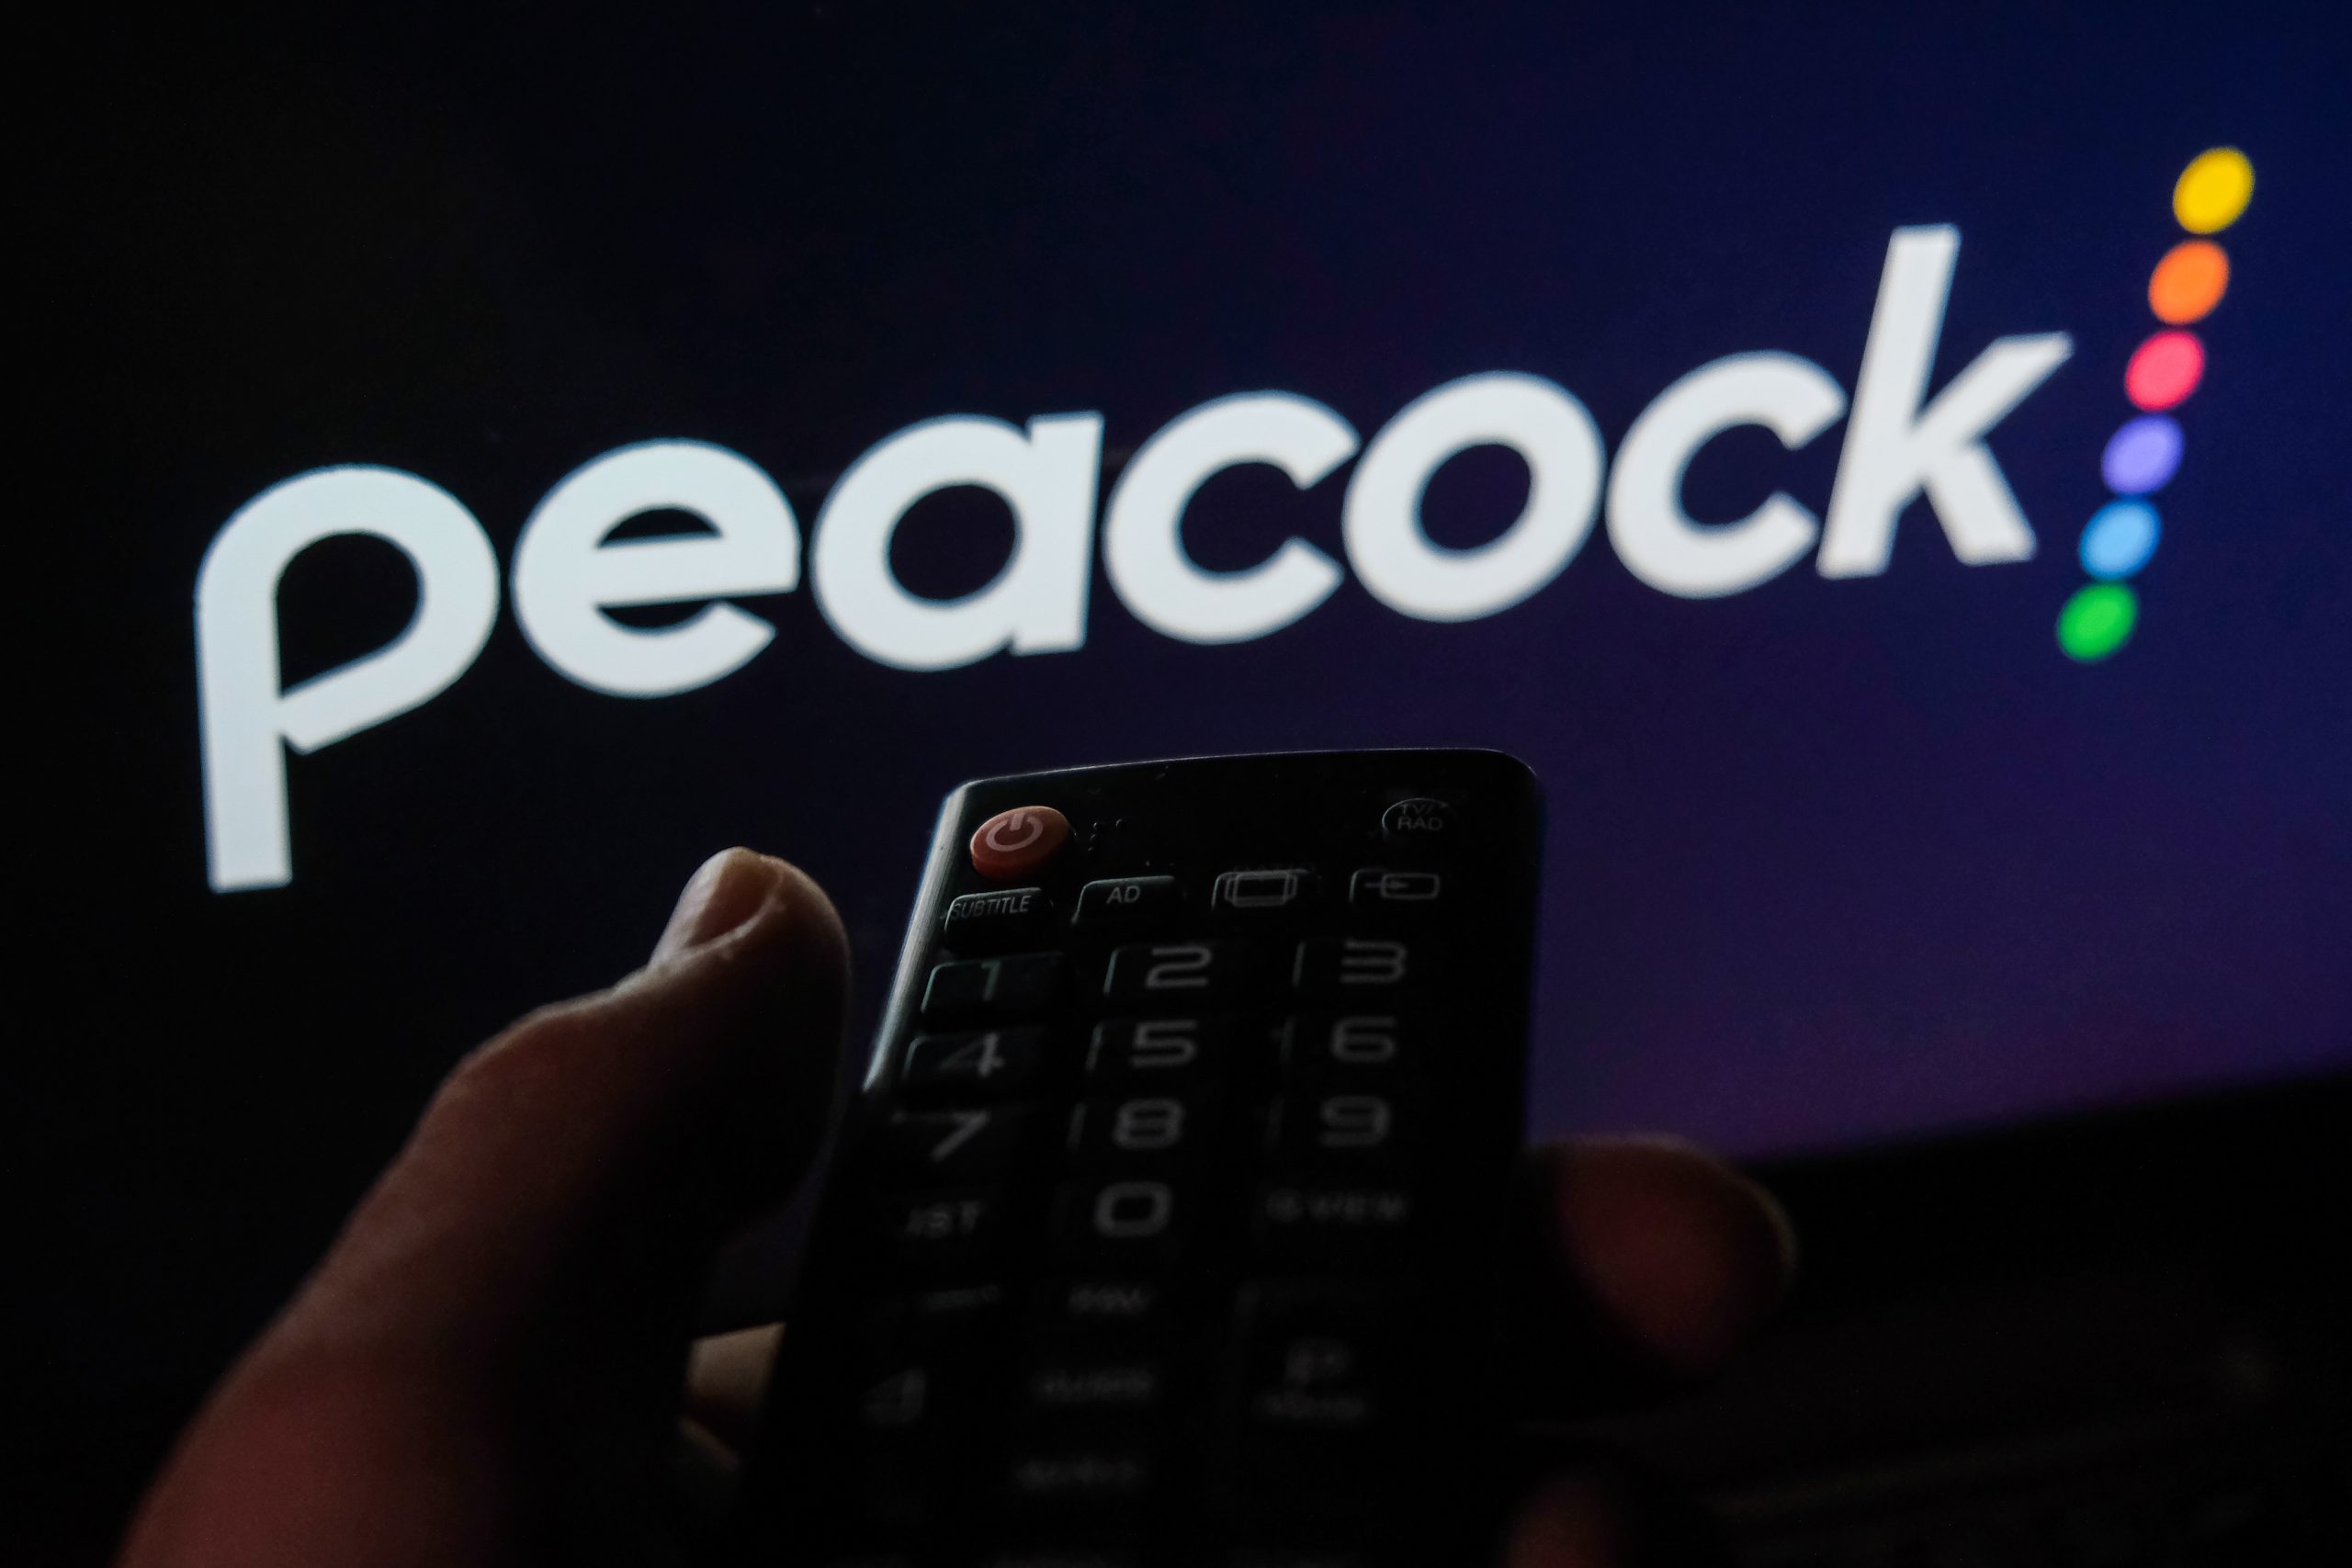 TV remote control is seen with Peacock logo displayed on a screen in this illustration photo taken in Krakow, Poland